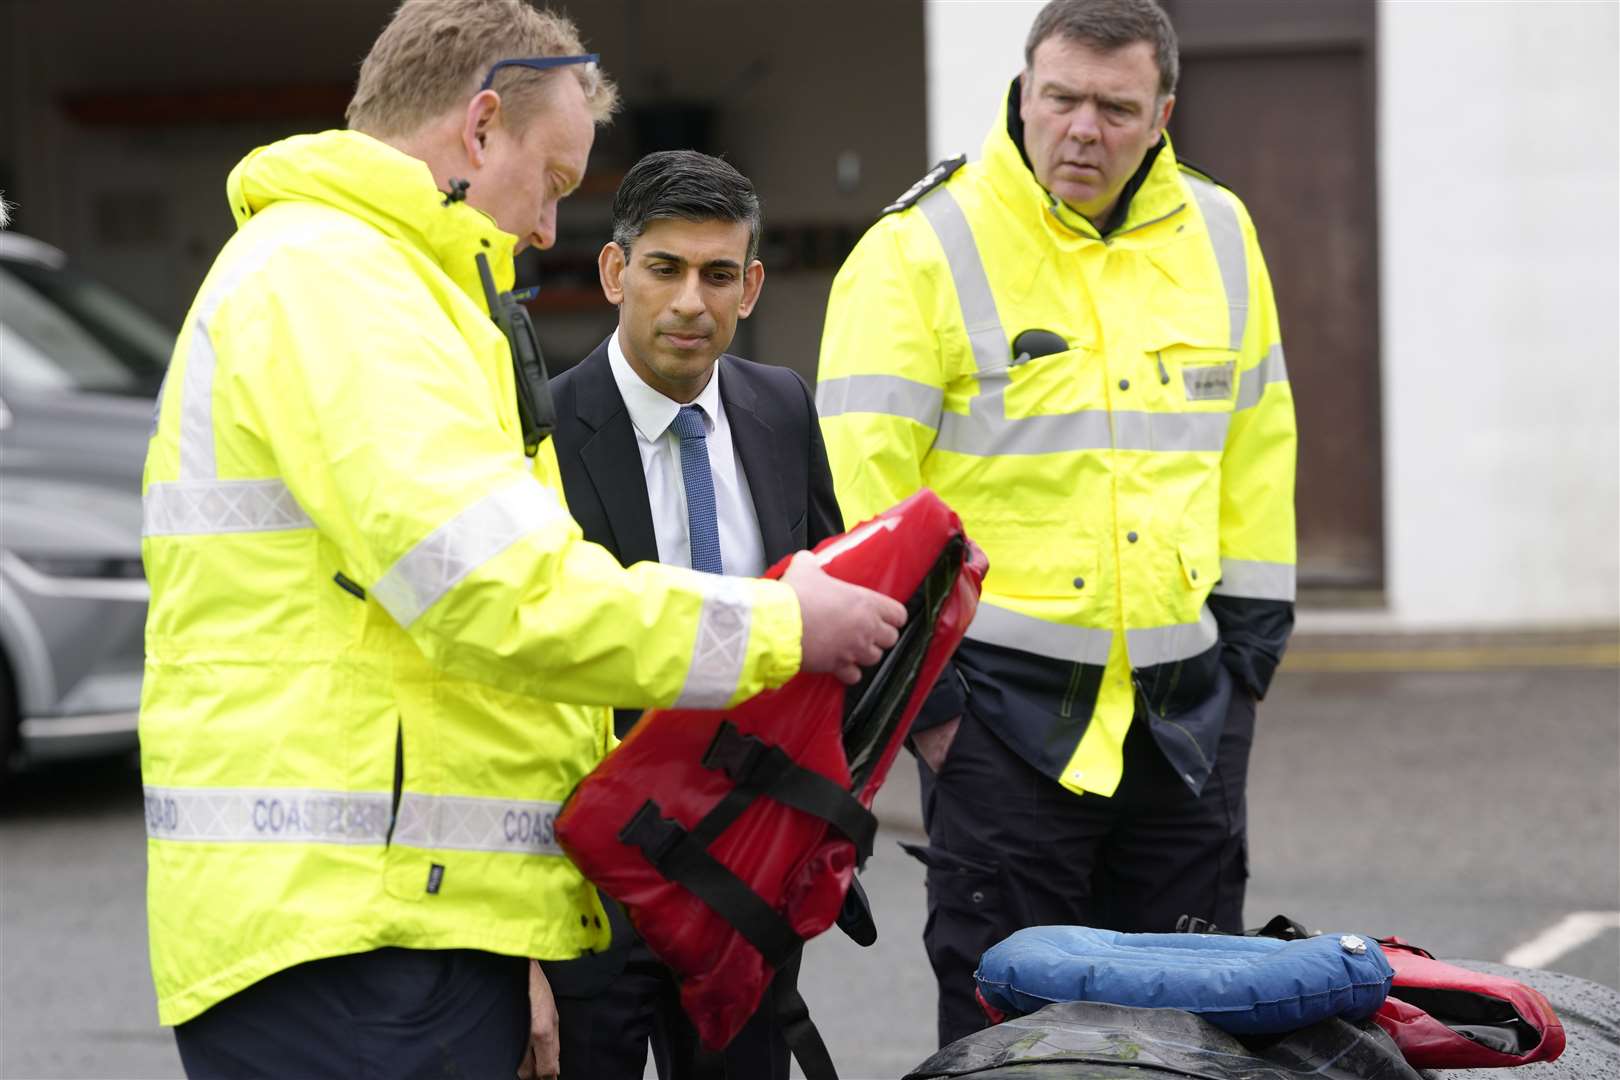 Mr Sunak speaks with staff as he views a rubber dinghy and life vests during a visit to the Home Office joint control centre in Dover, Kent (Kirsty Wigglesworth/PA)